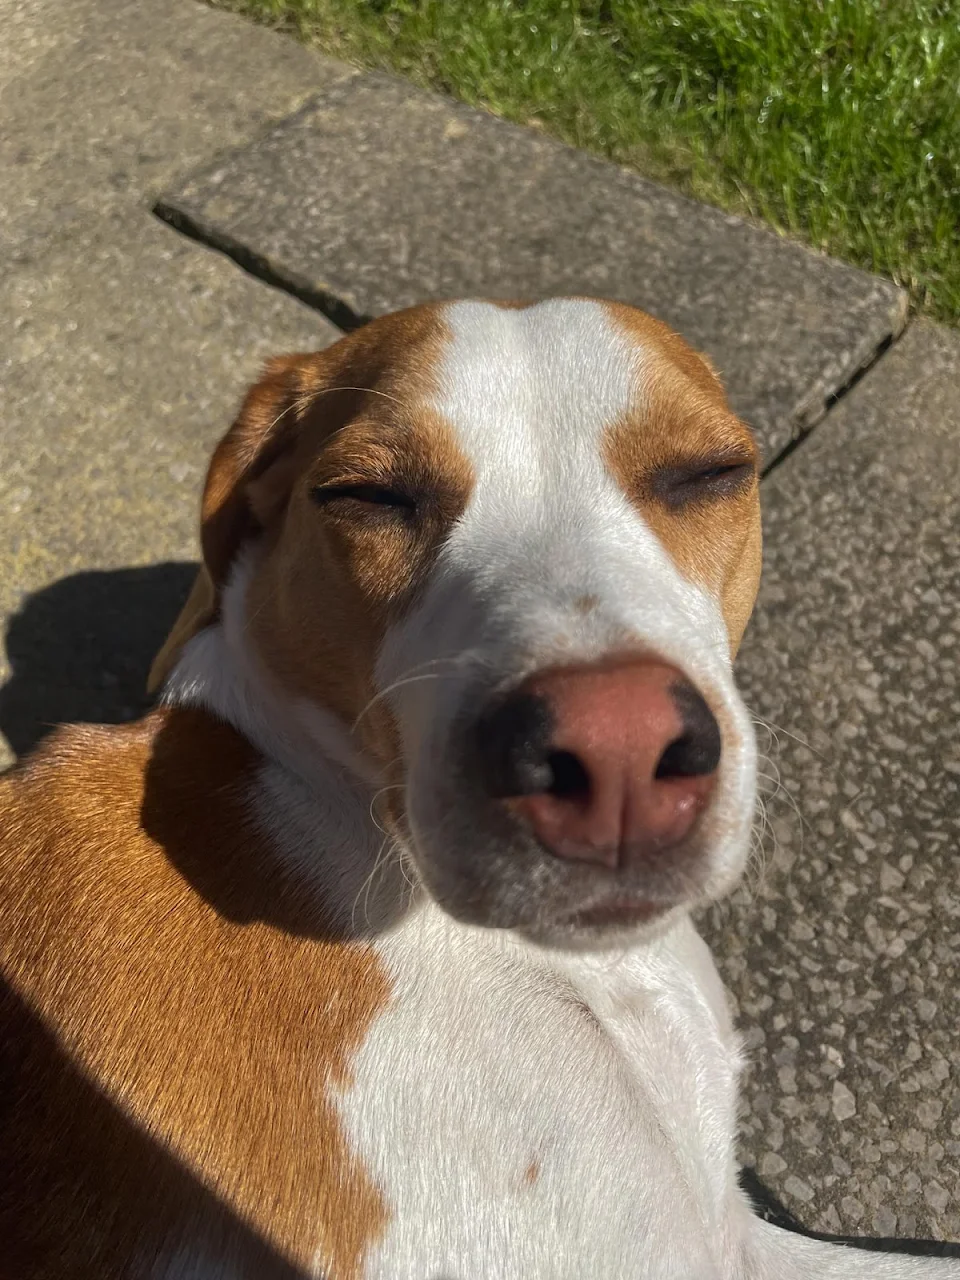 my boy gets very tired when it's sunny